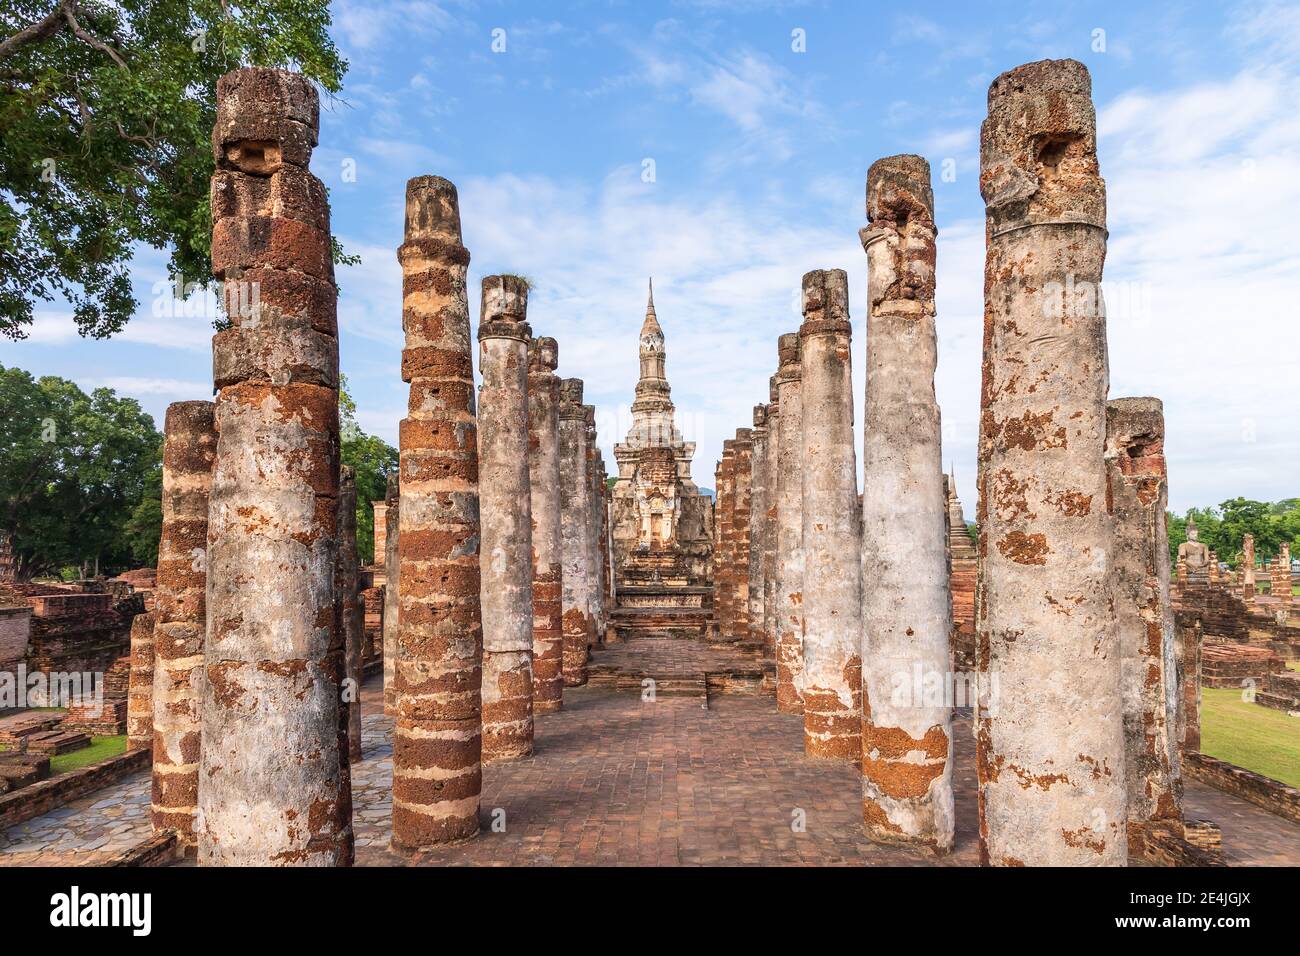 Row of columns in ruined chapel and pagoda in monastery complex at Wat Mahathat temple, Sukhothai Historical Park, Thailand Stock Photo